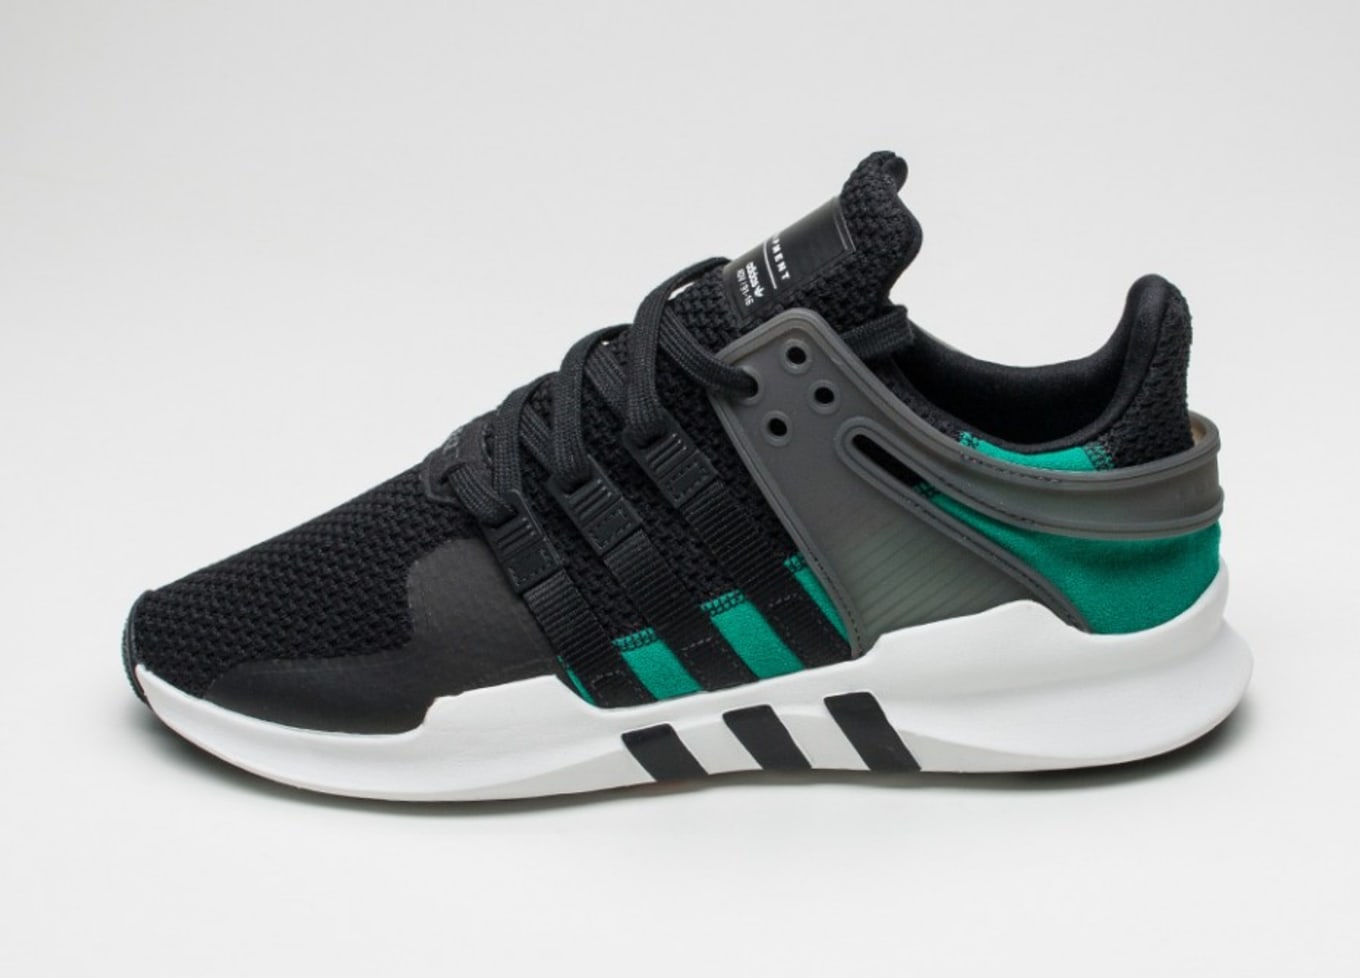 adidas sneakers with green back